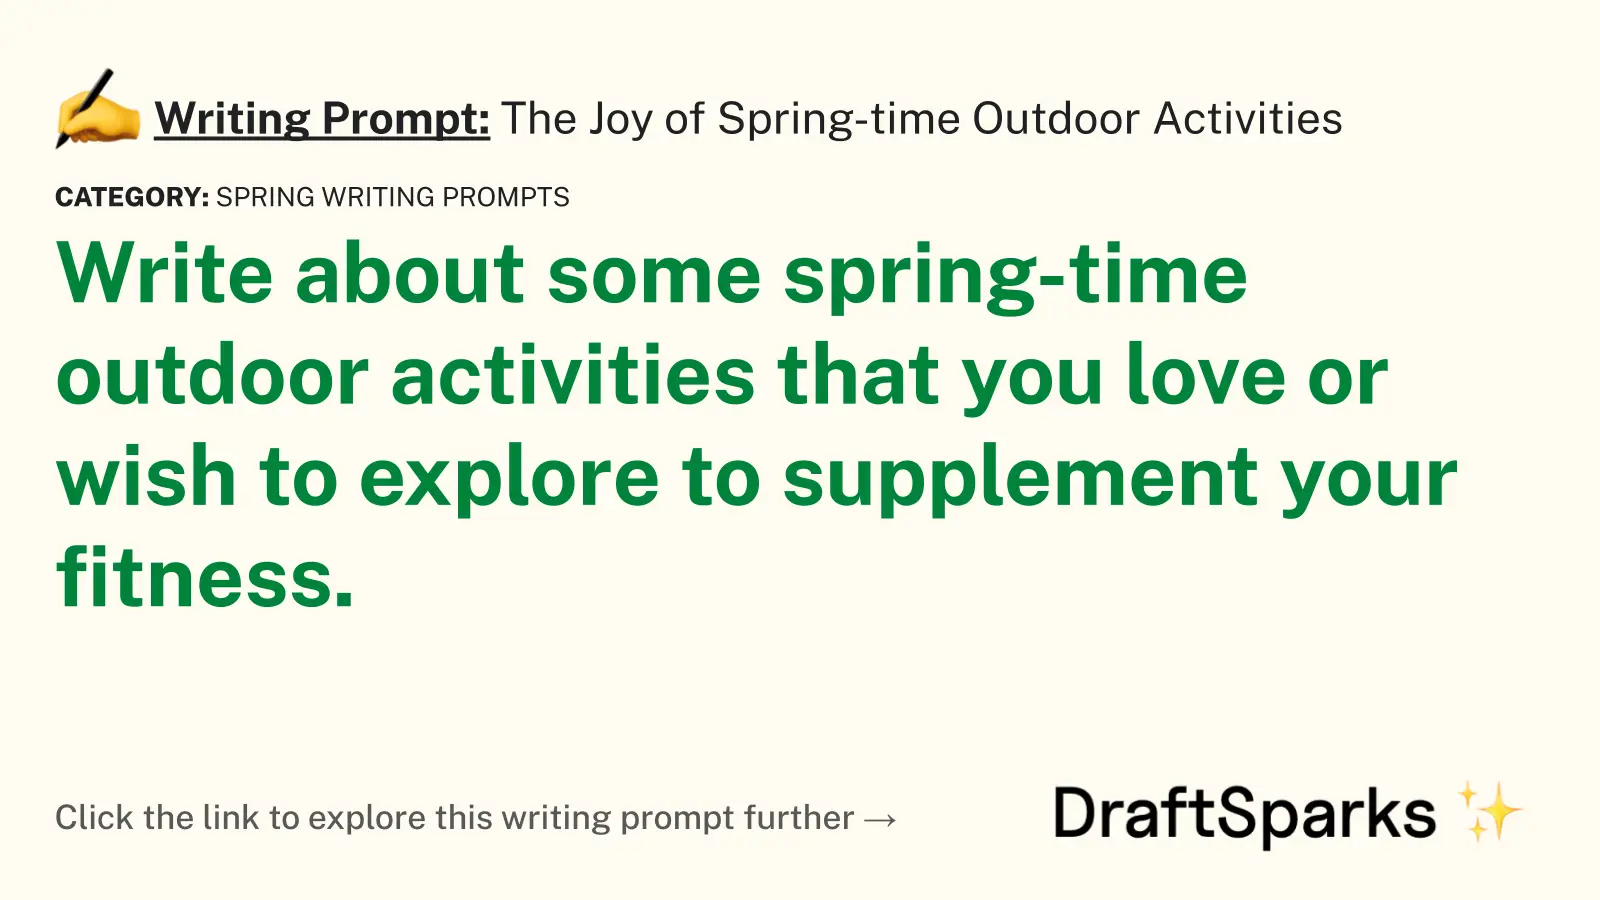 The Joy of Spring-time Outdoor Activities